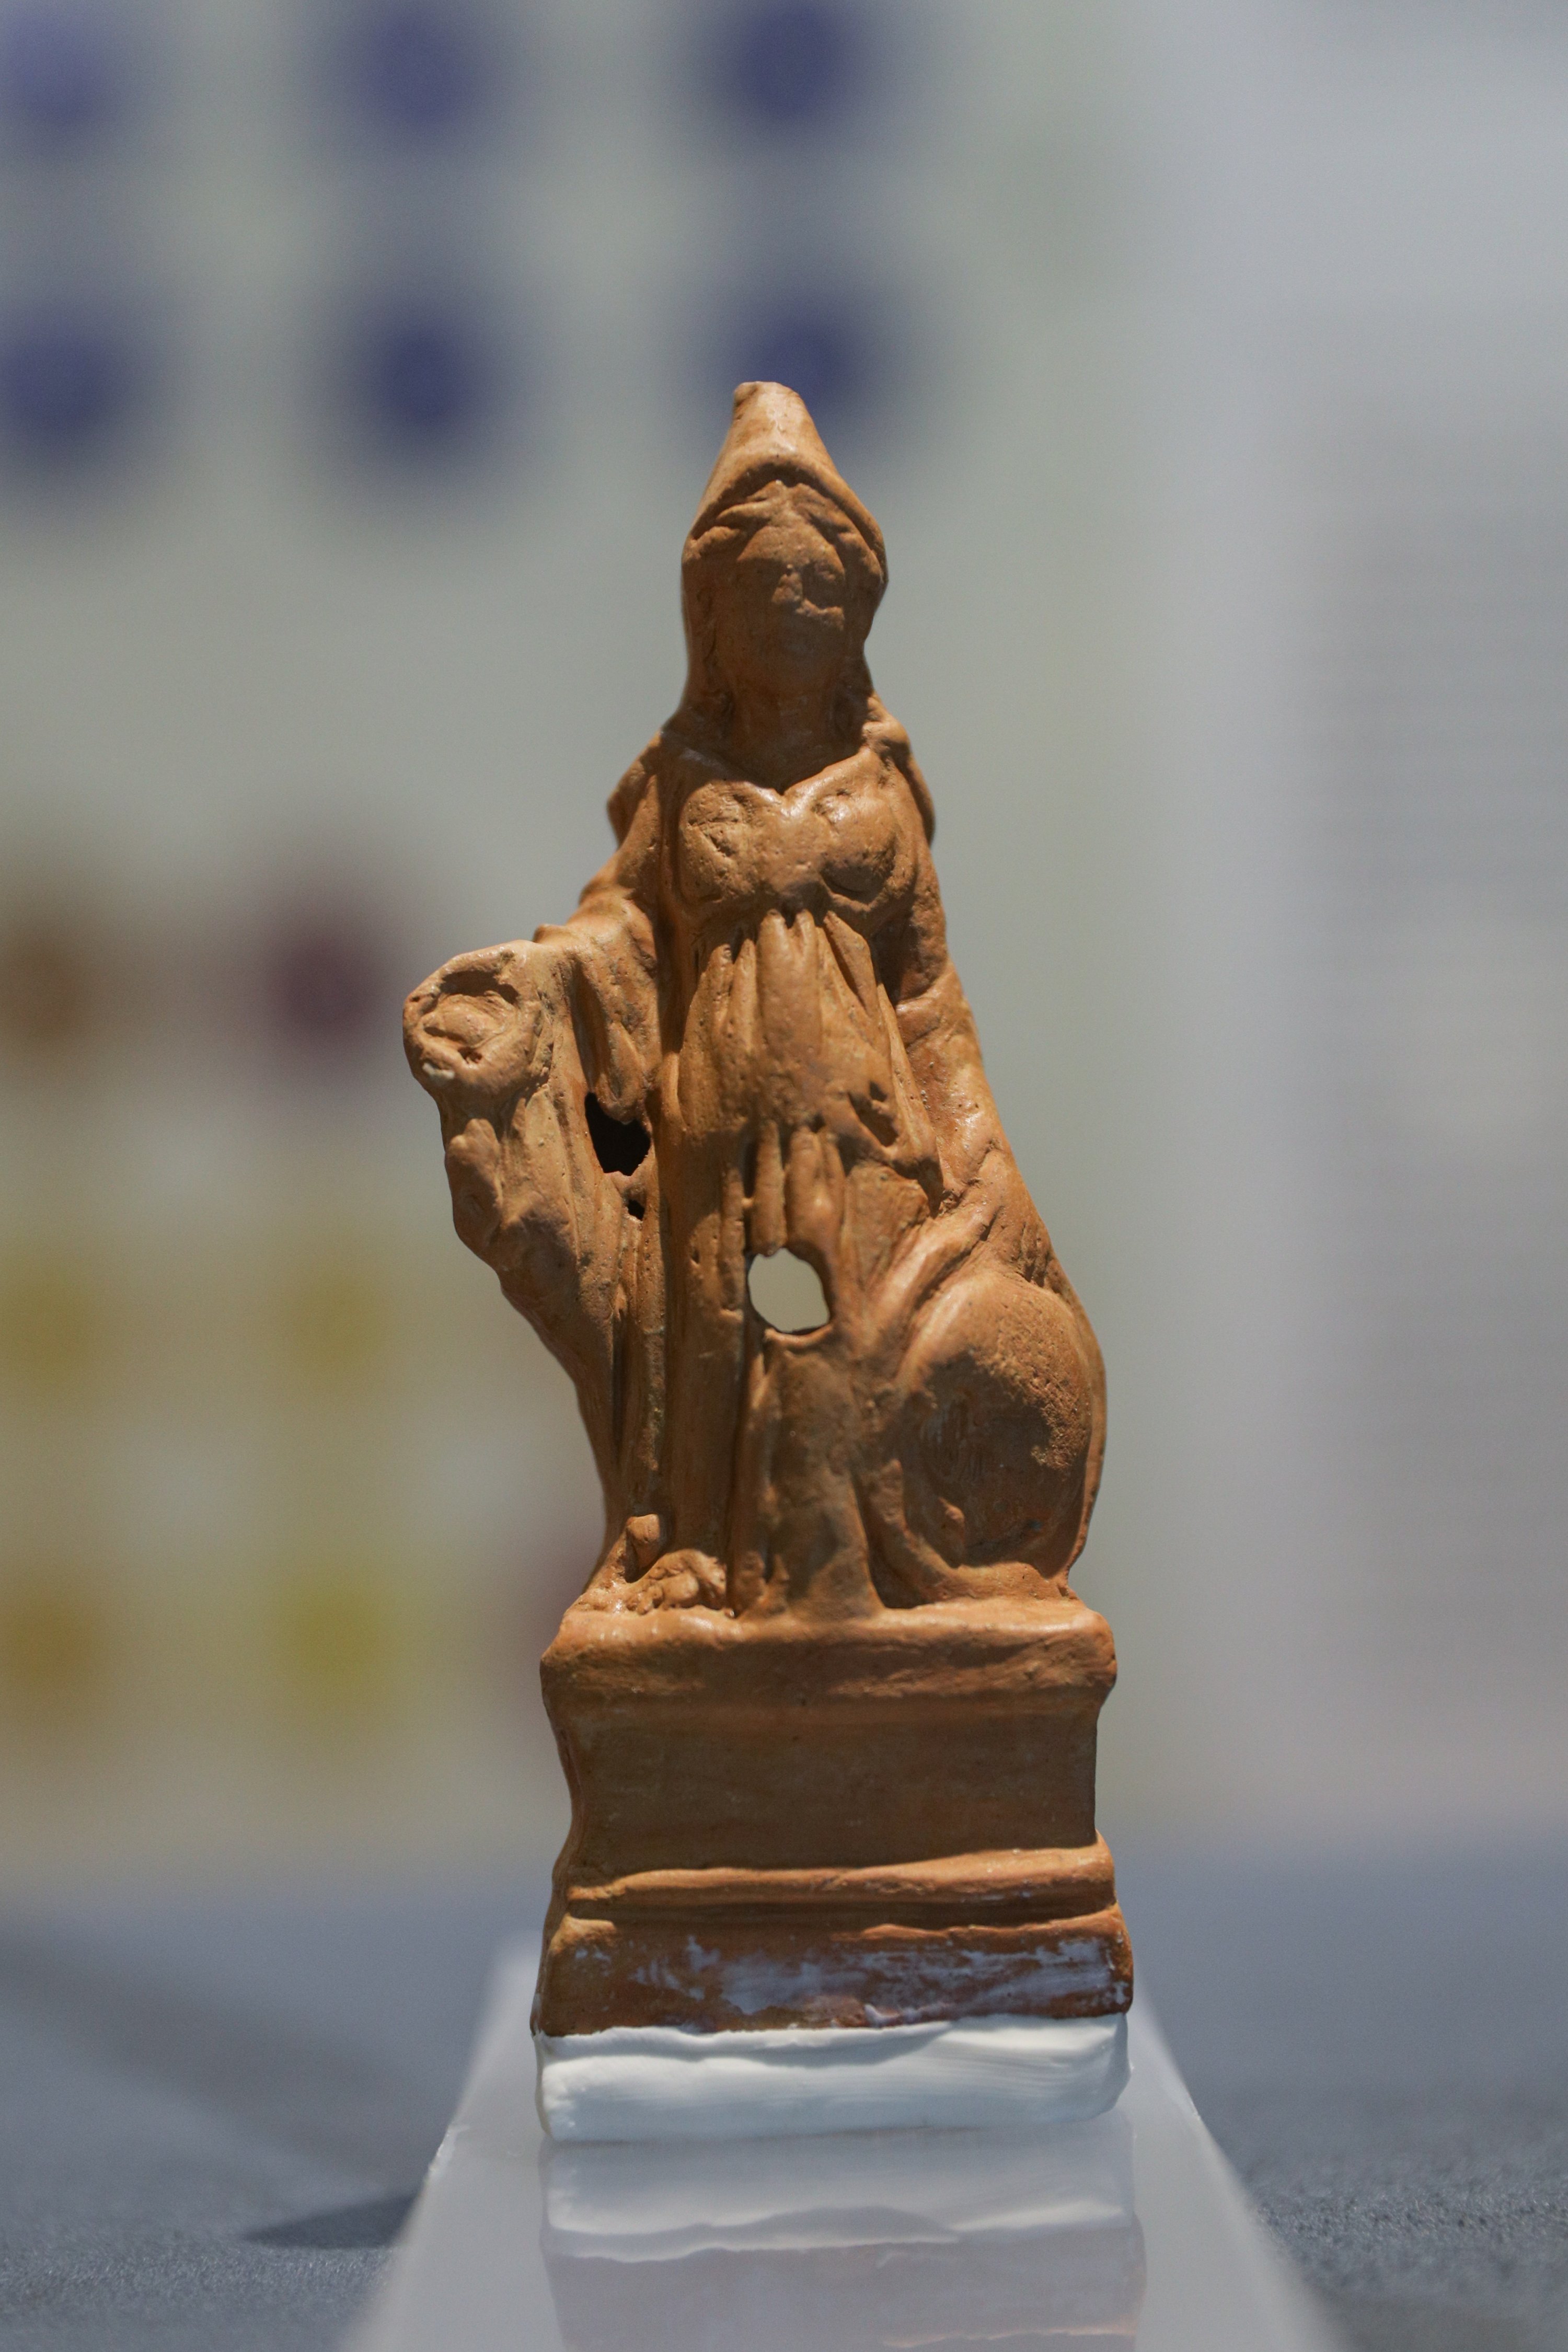 A 12-centimeter-tall Athena statue found in 2012 in the Aliağa Cyme excavation on display at the Izmir Archaeological Museum, western Turkey, July 12, 2022. (AA Photo)